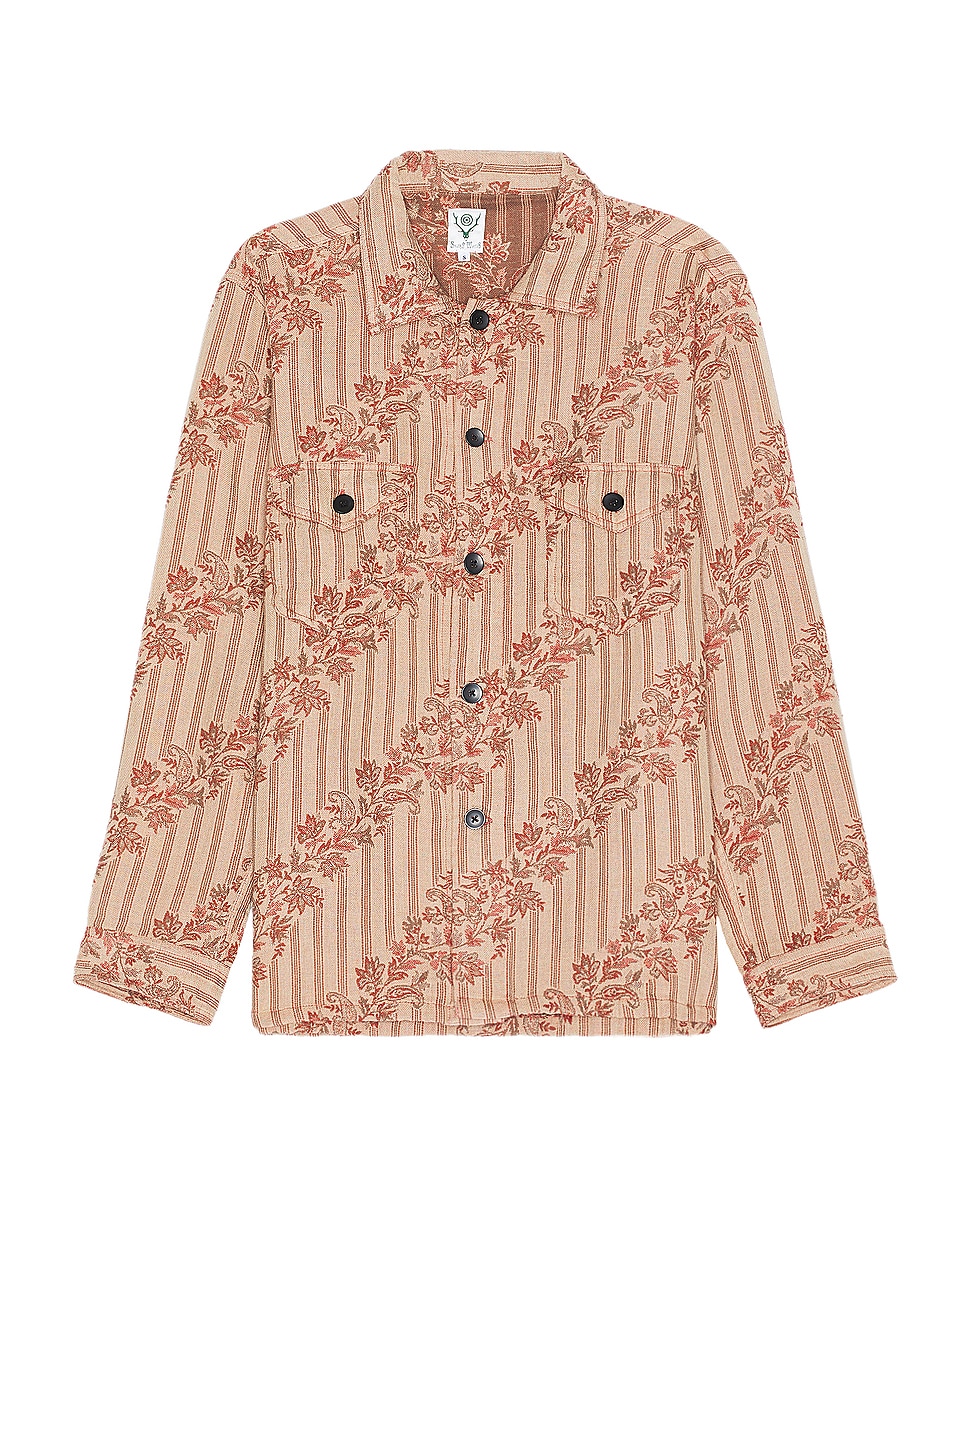 Image 1 of South2 West8 Smokey Shirt Cotton Jacquard Paisley in C-Beige